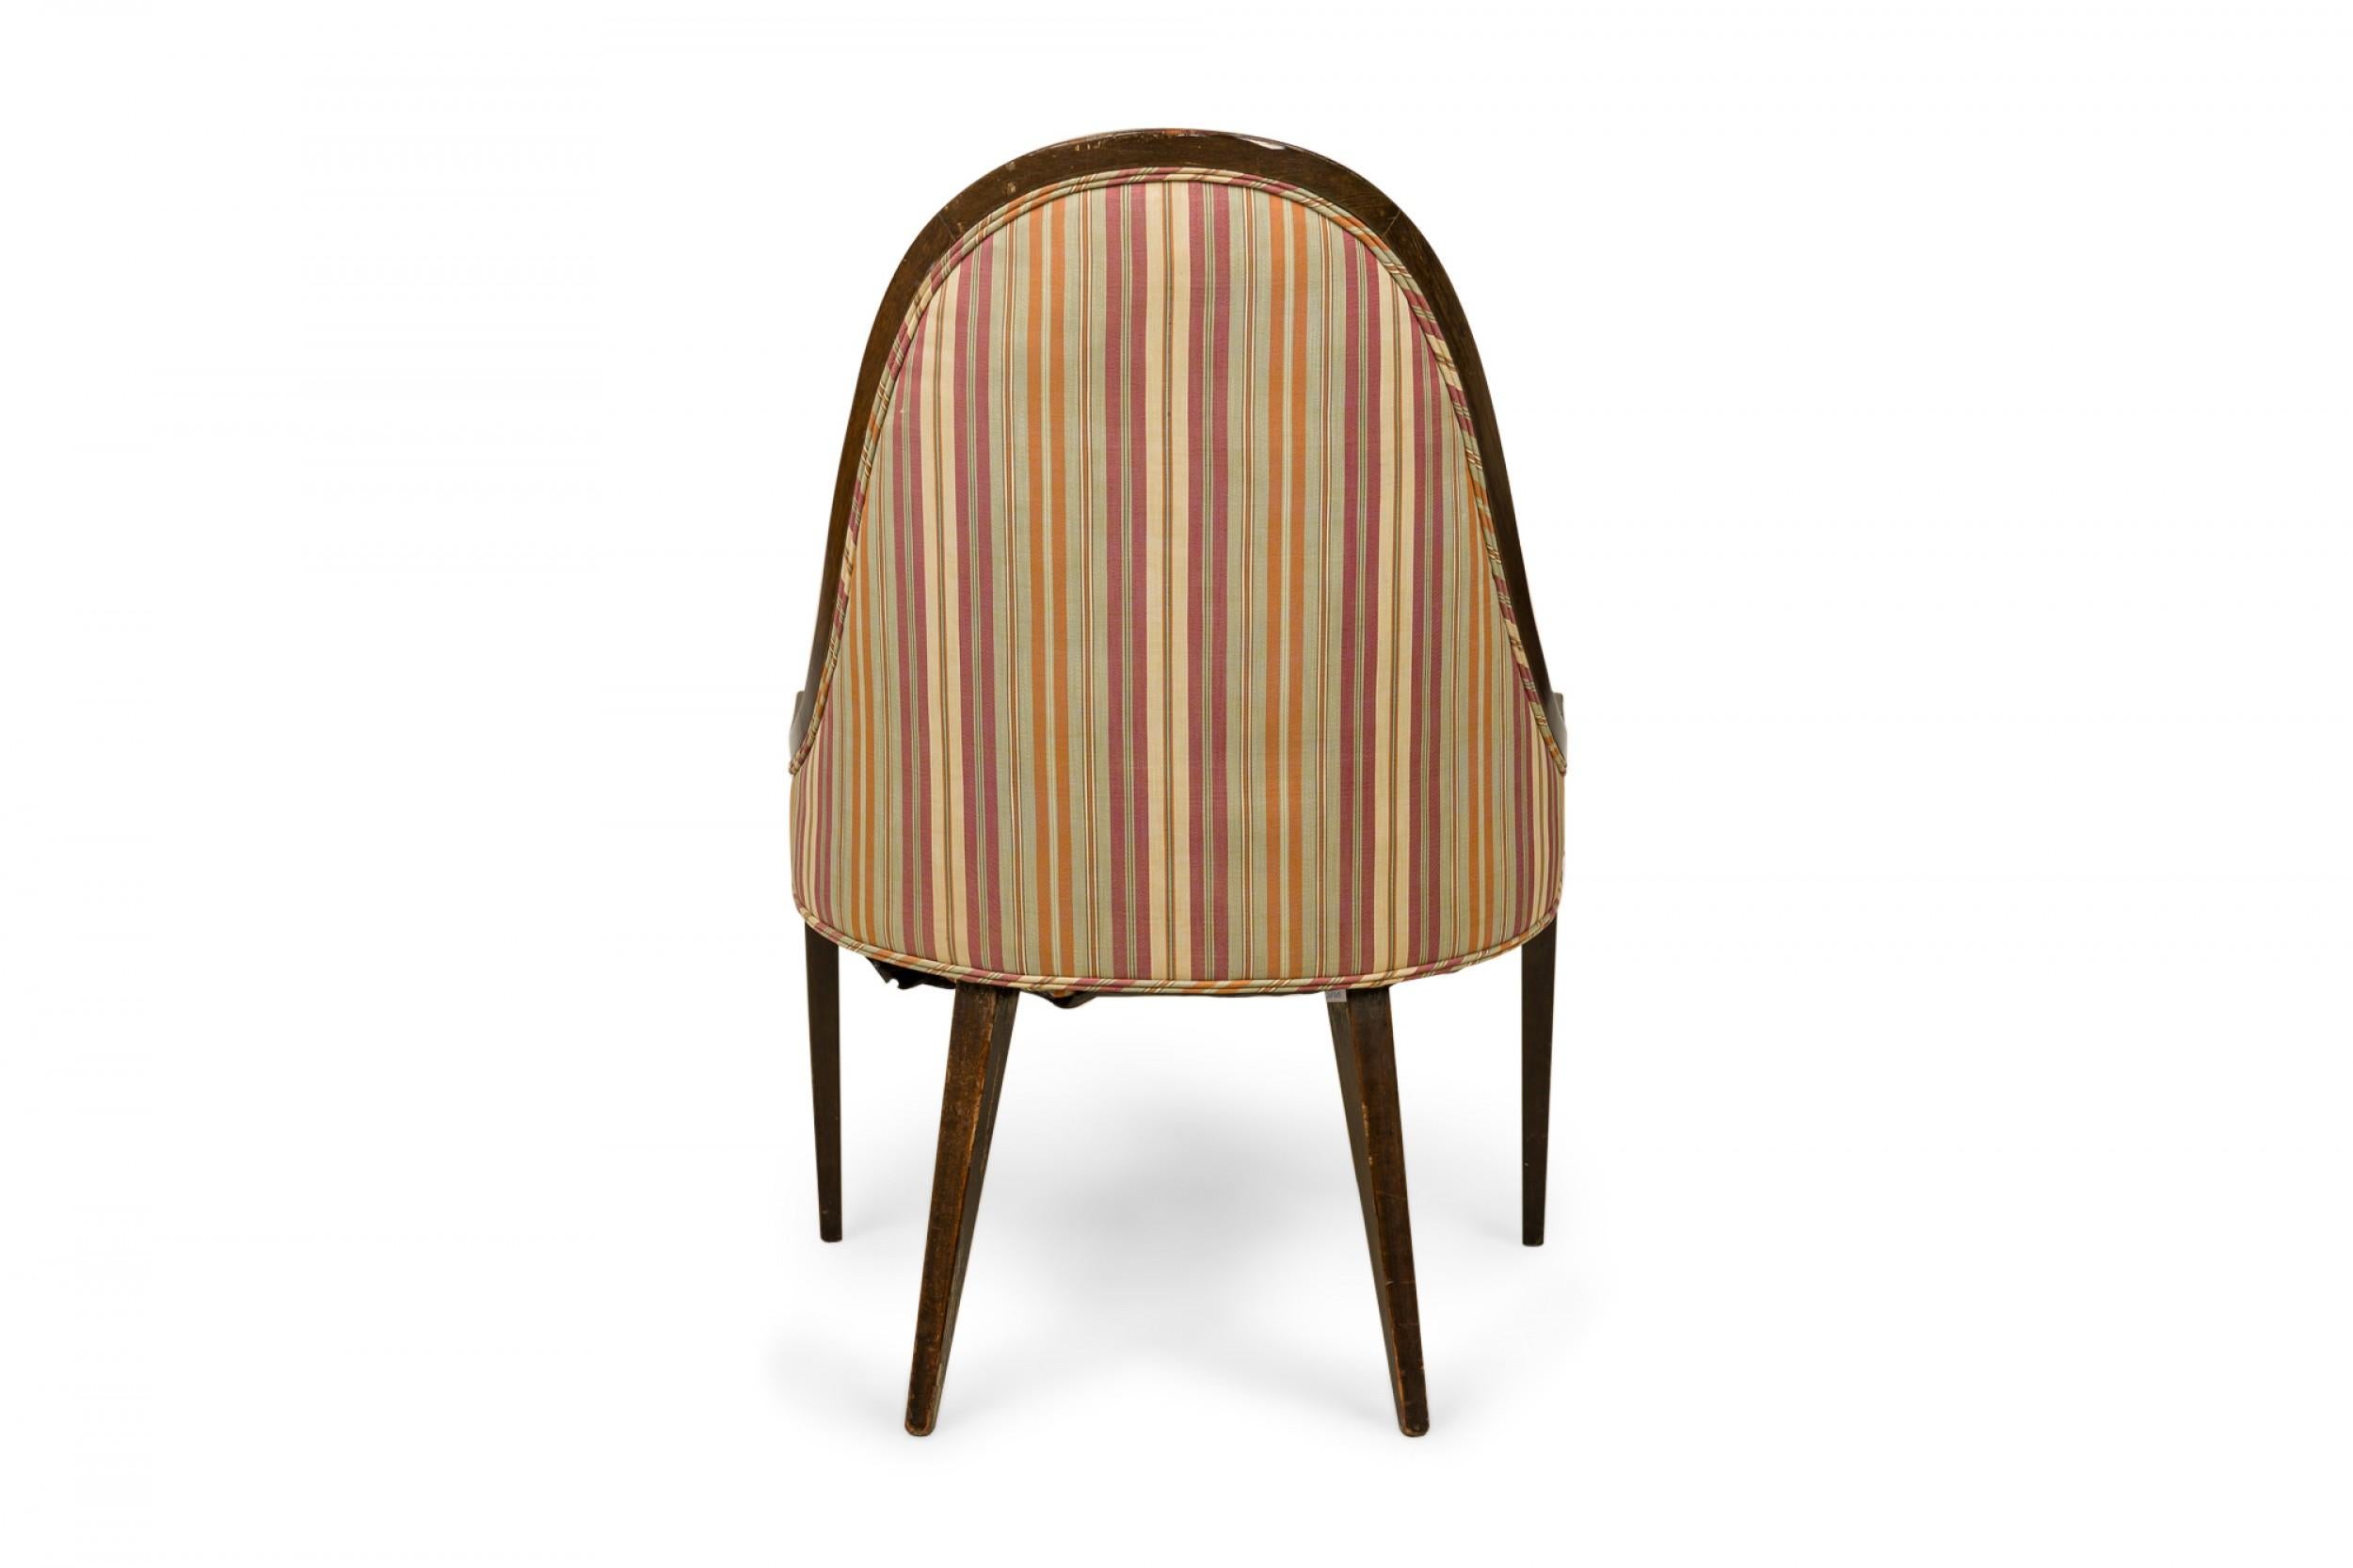 Harvey Probber 'Gondola' Wood and Striped Upholstery Side Chair In Good Condition For Sale In New York, NY